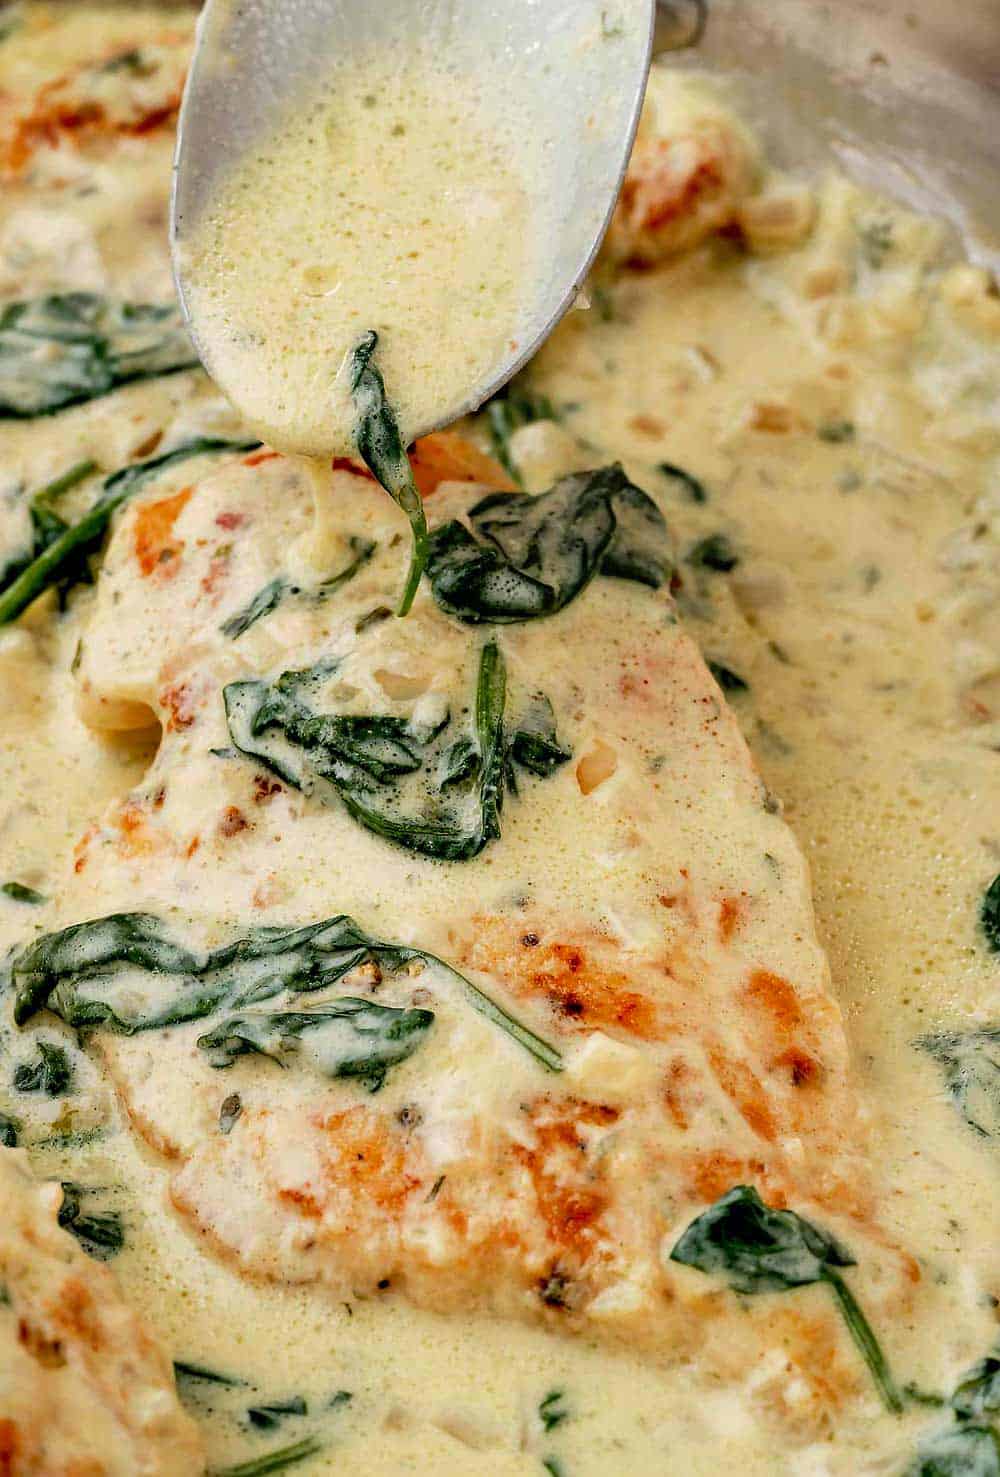 Pouring Boursin cheese sauce over Creamy Boursin Chicken in a skillet.